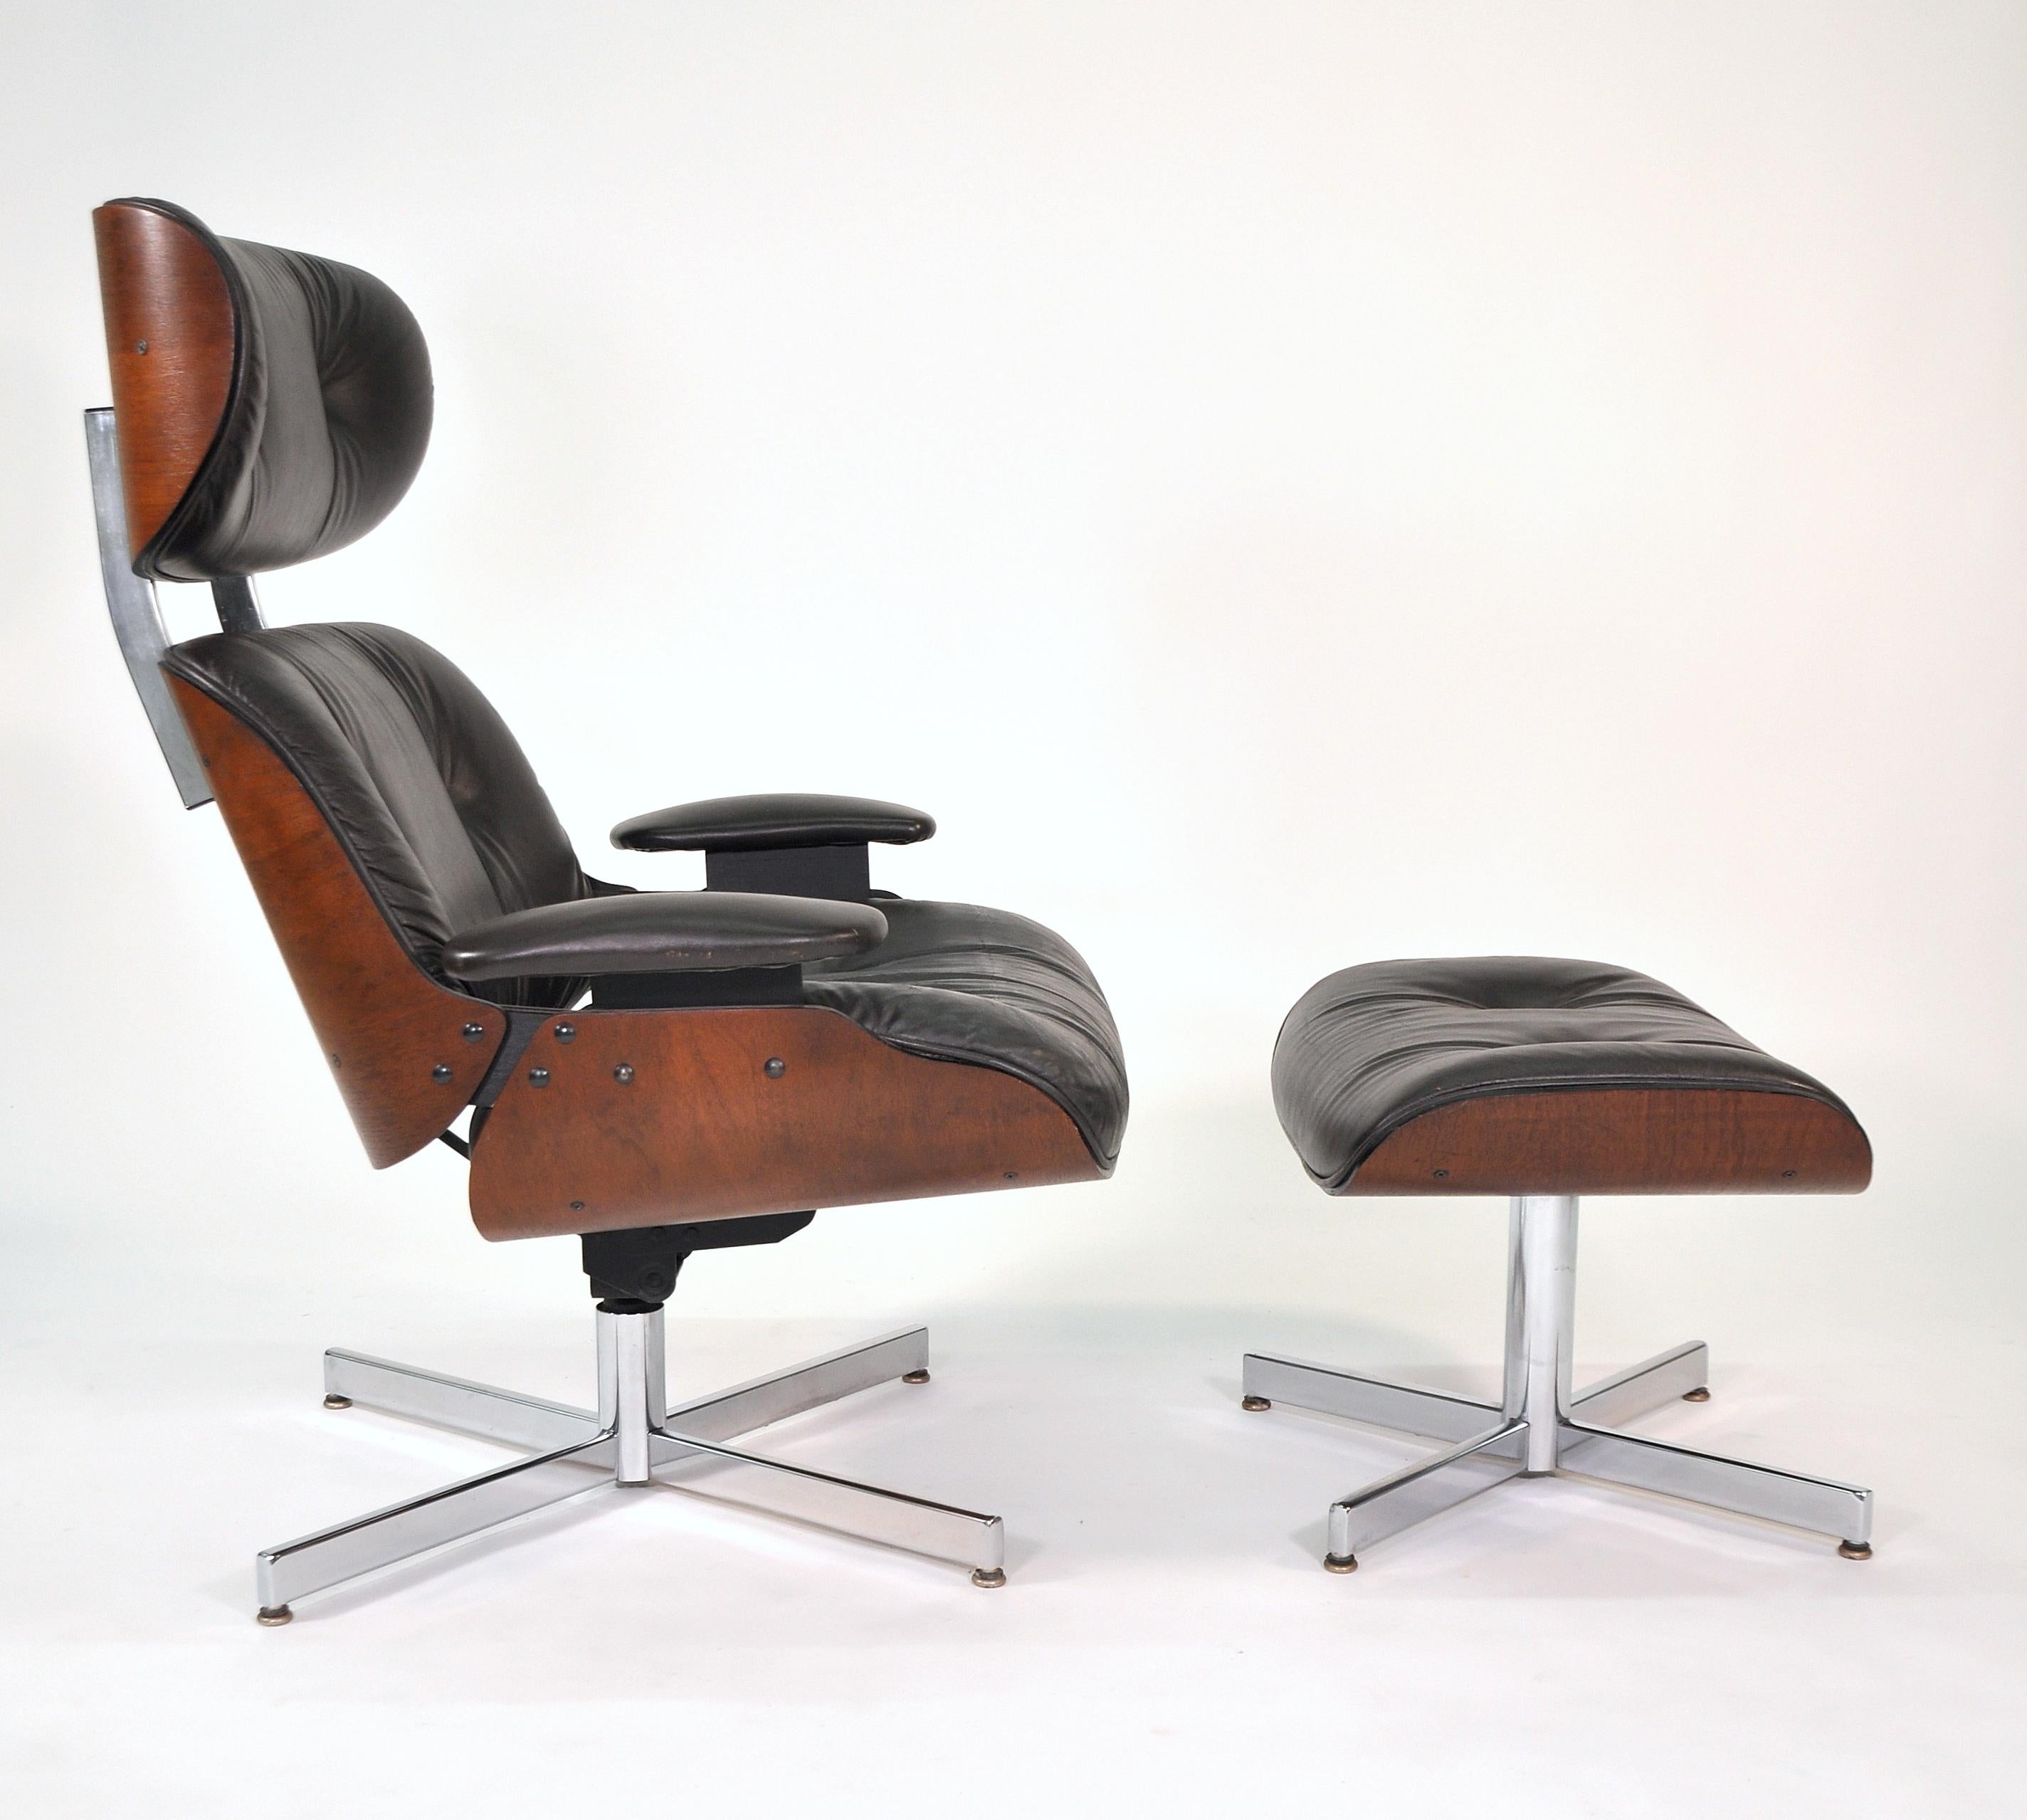 Vintage Mid-Century Modern dark chocolate brown leather Eames style lounge and stool, by Plycraft, dating from the 1960s. The armchair swivels, tilts and is very comfortable, the footstool is fixed. They feature walnut bentwood shells with tufted